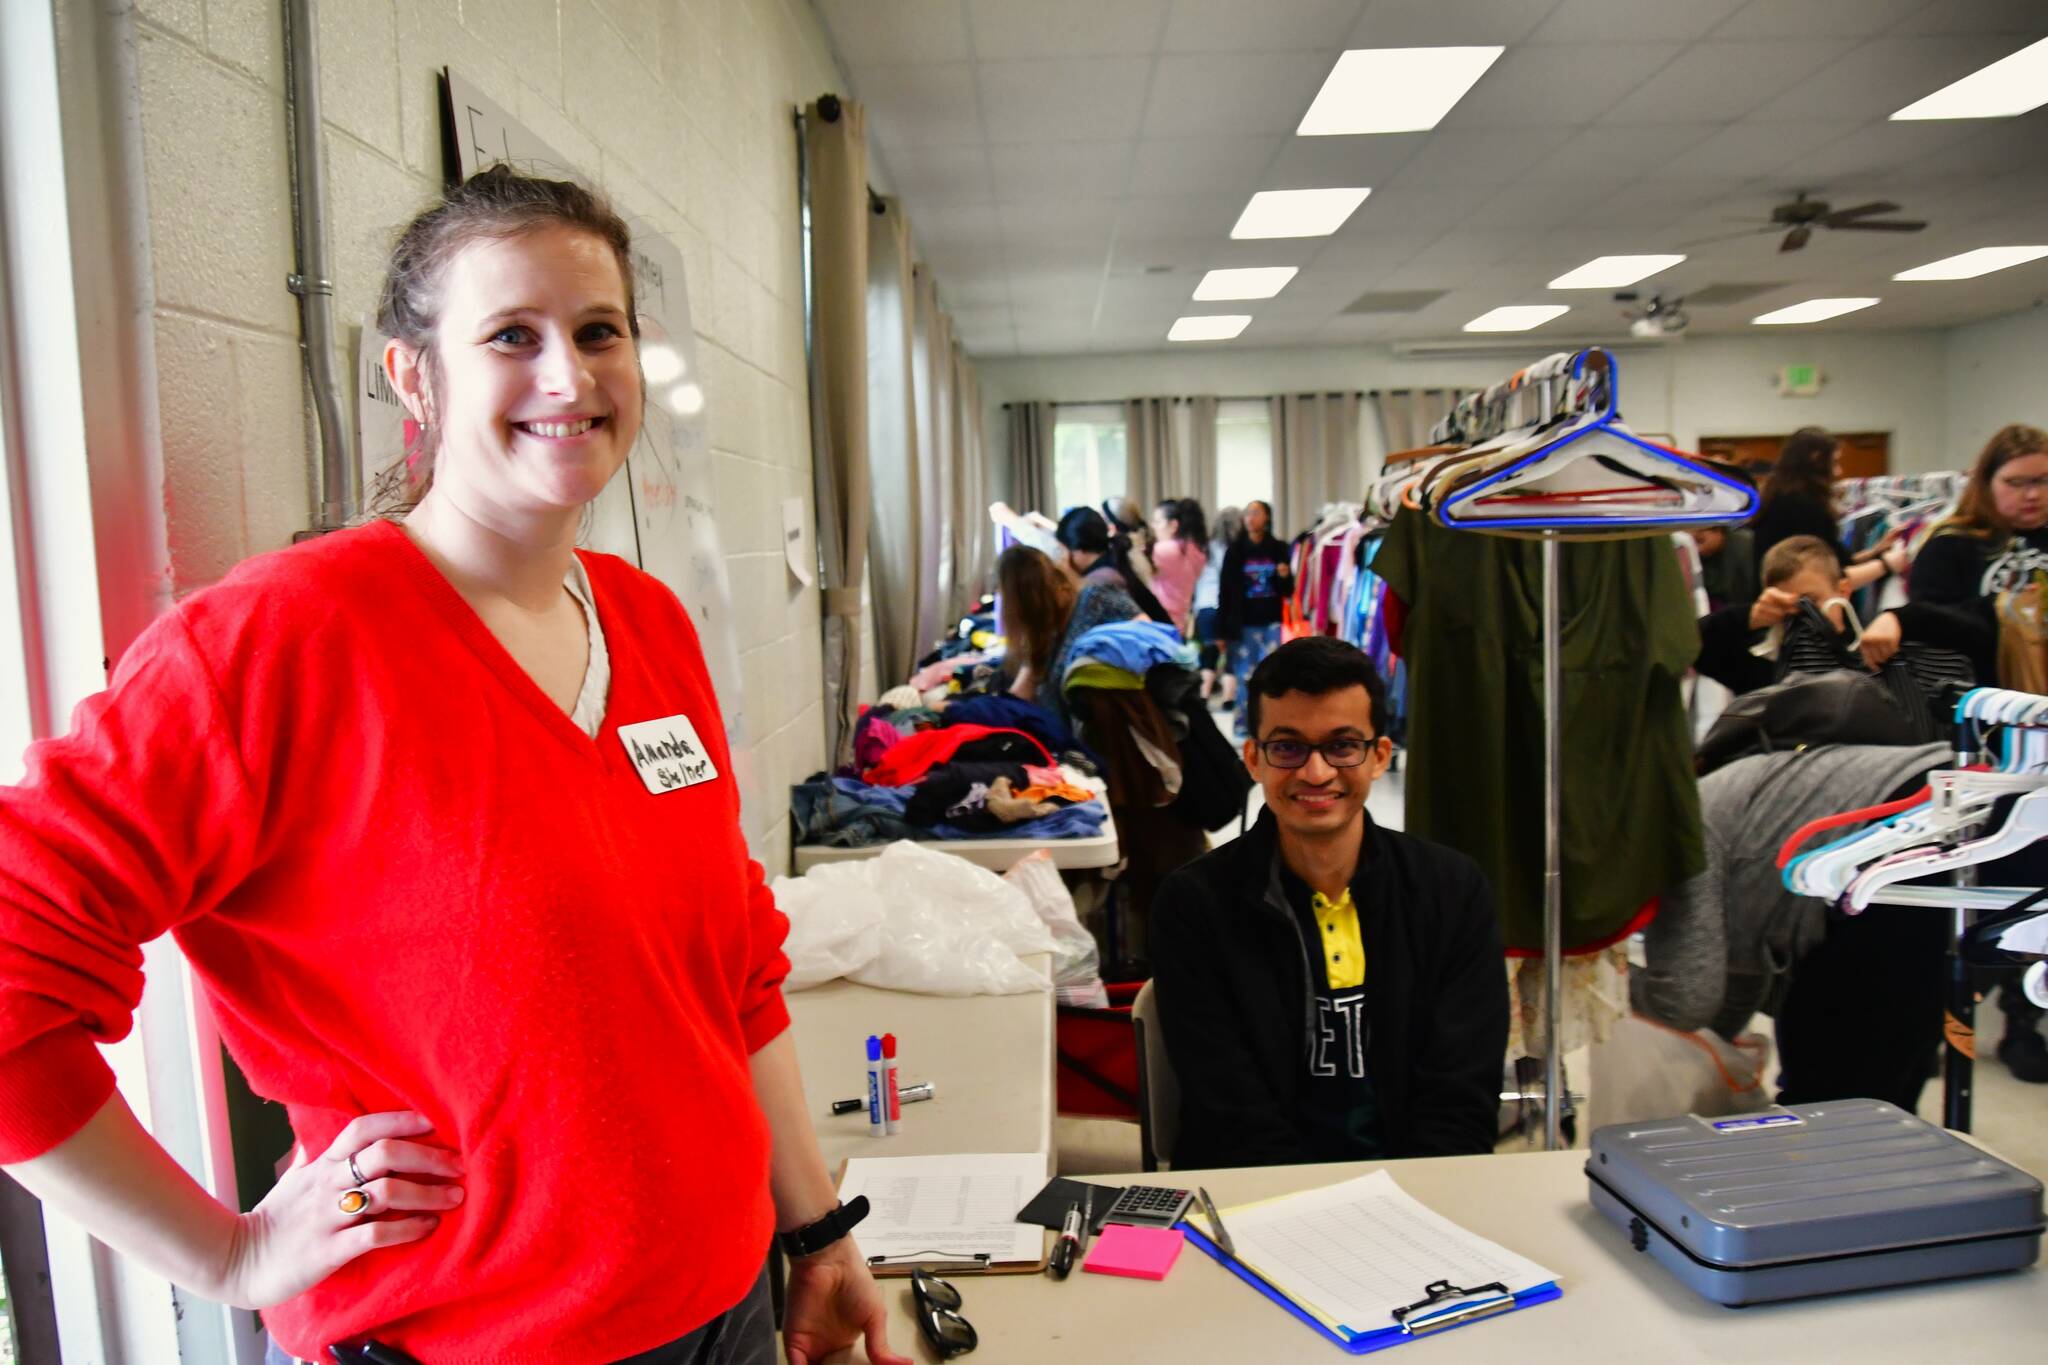 Over 200 people attended the free clothing swap at the South King Tool Library on May 4 in Federal Way. Photo by Bruce Honda